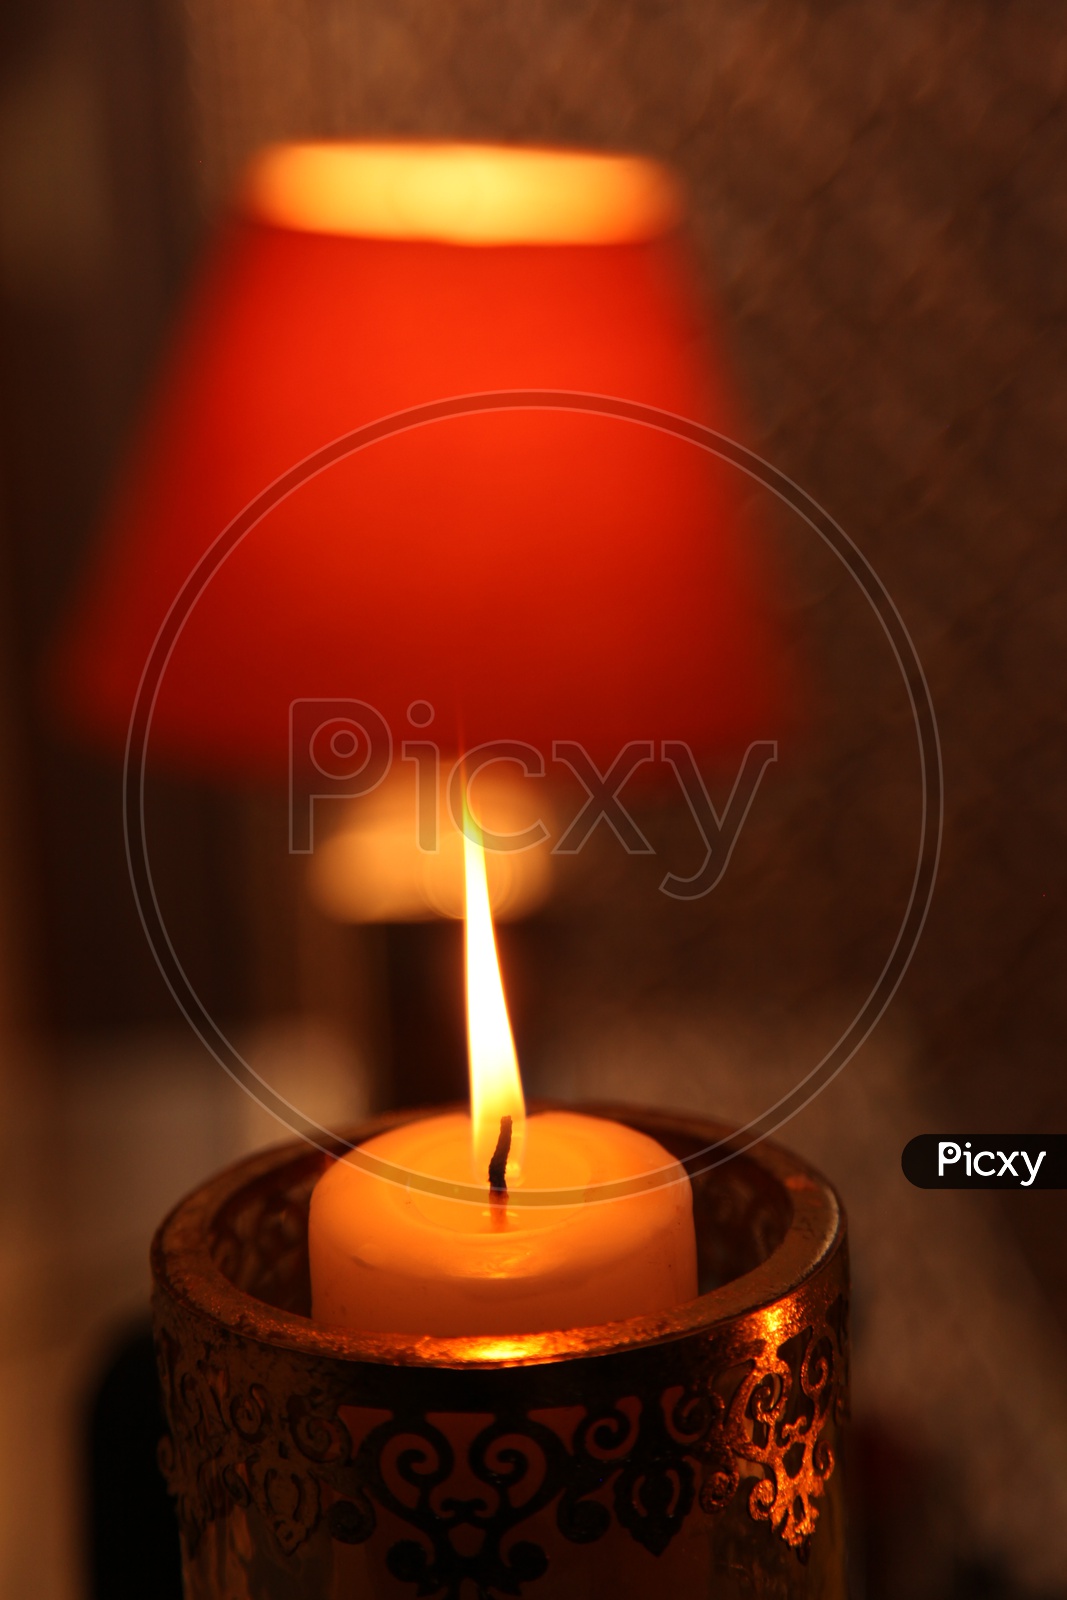 Photograph of Lightened up candle